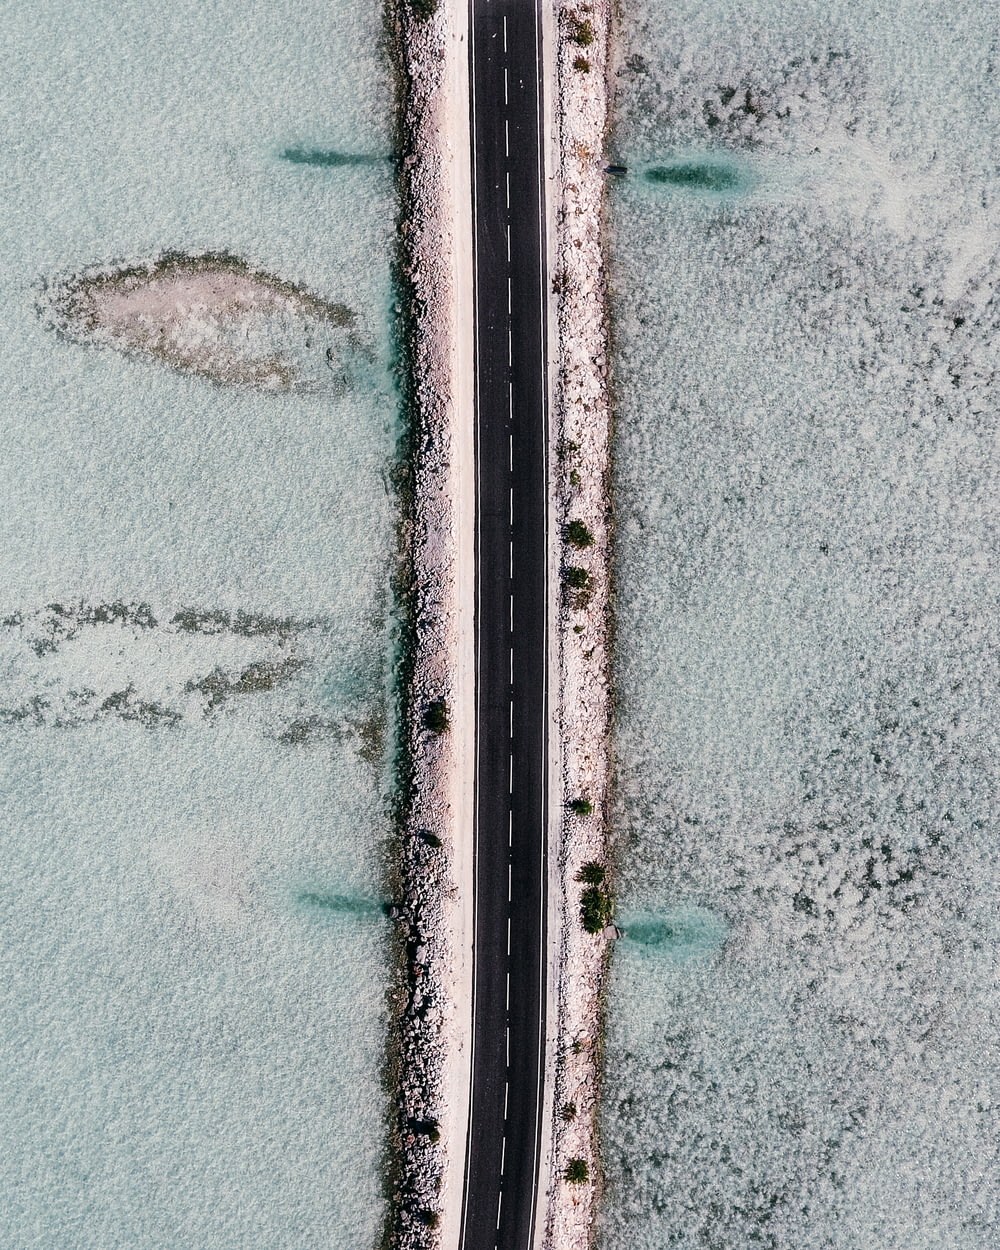 an aerial view of a road in the middle of a body of water